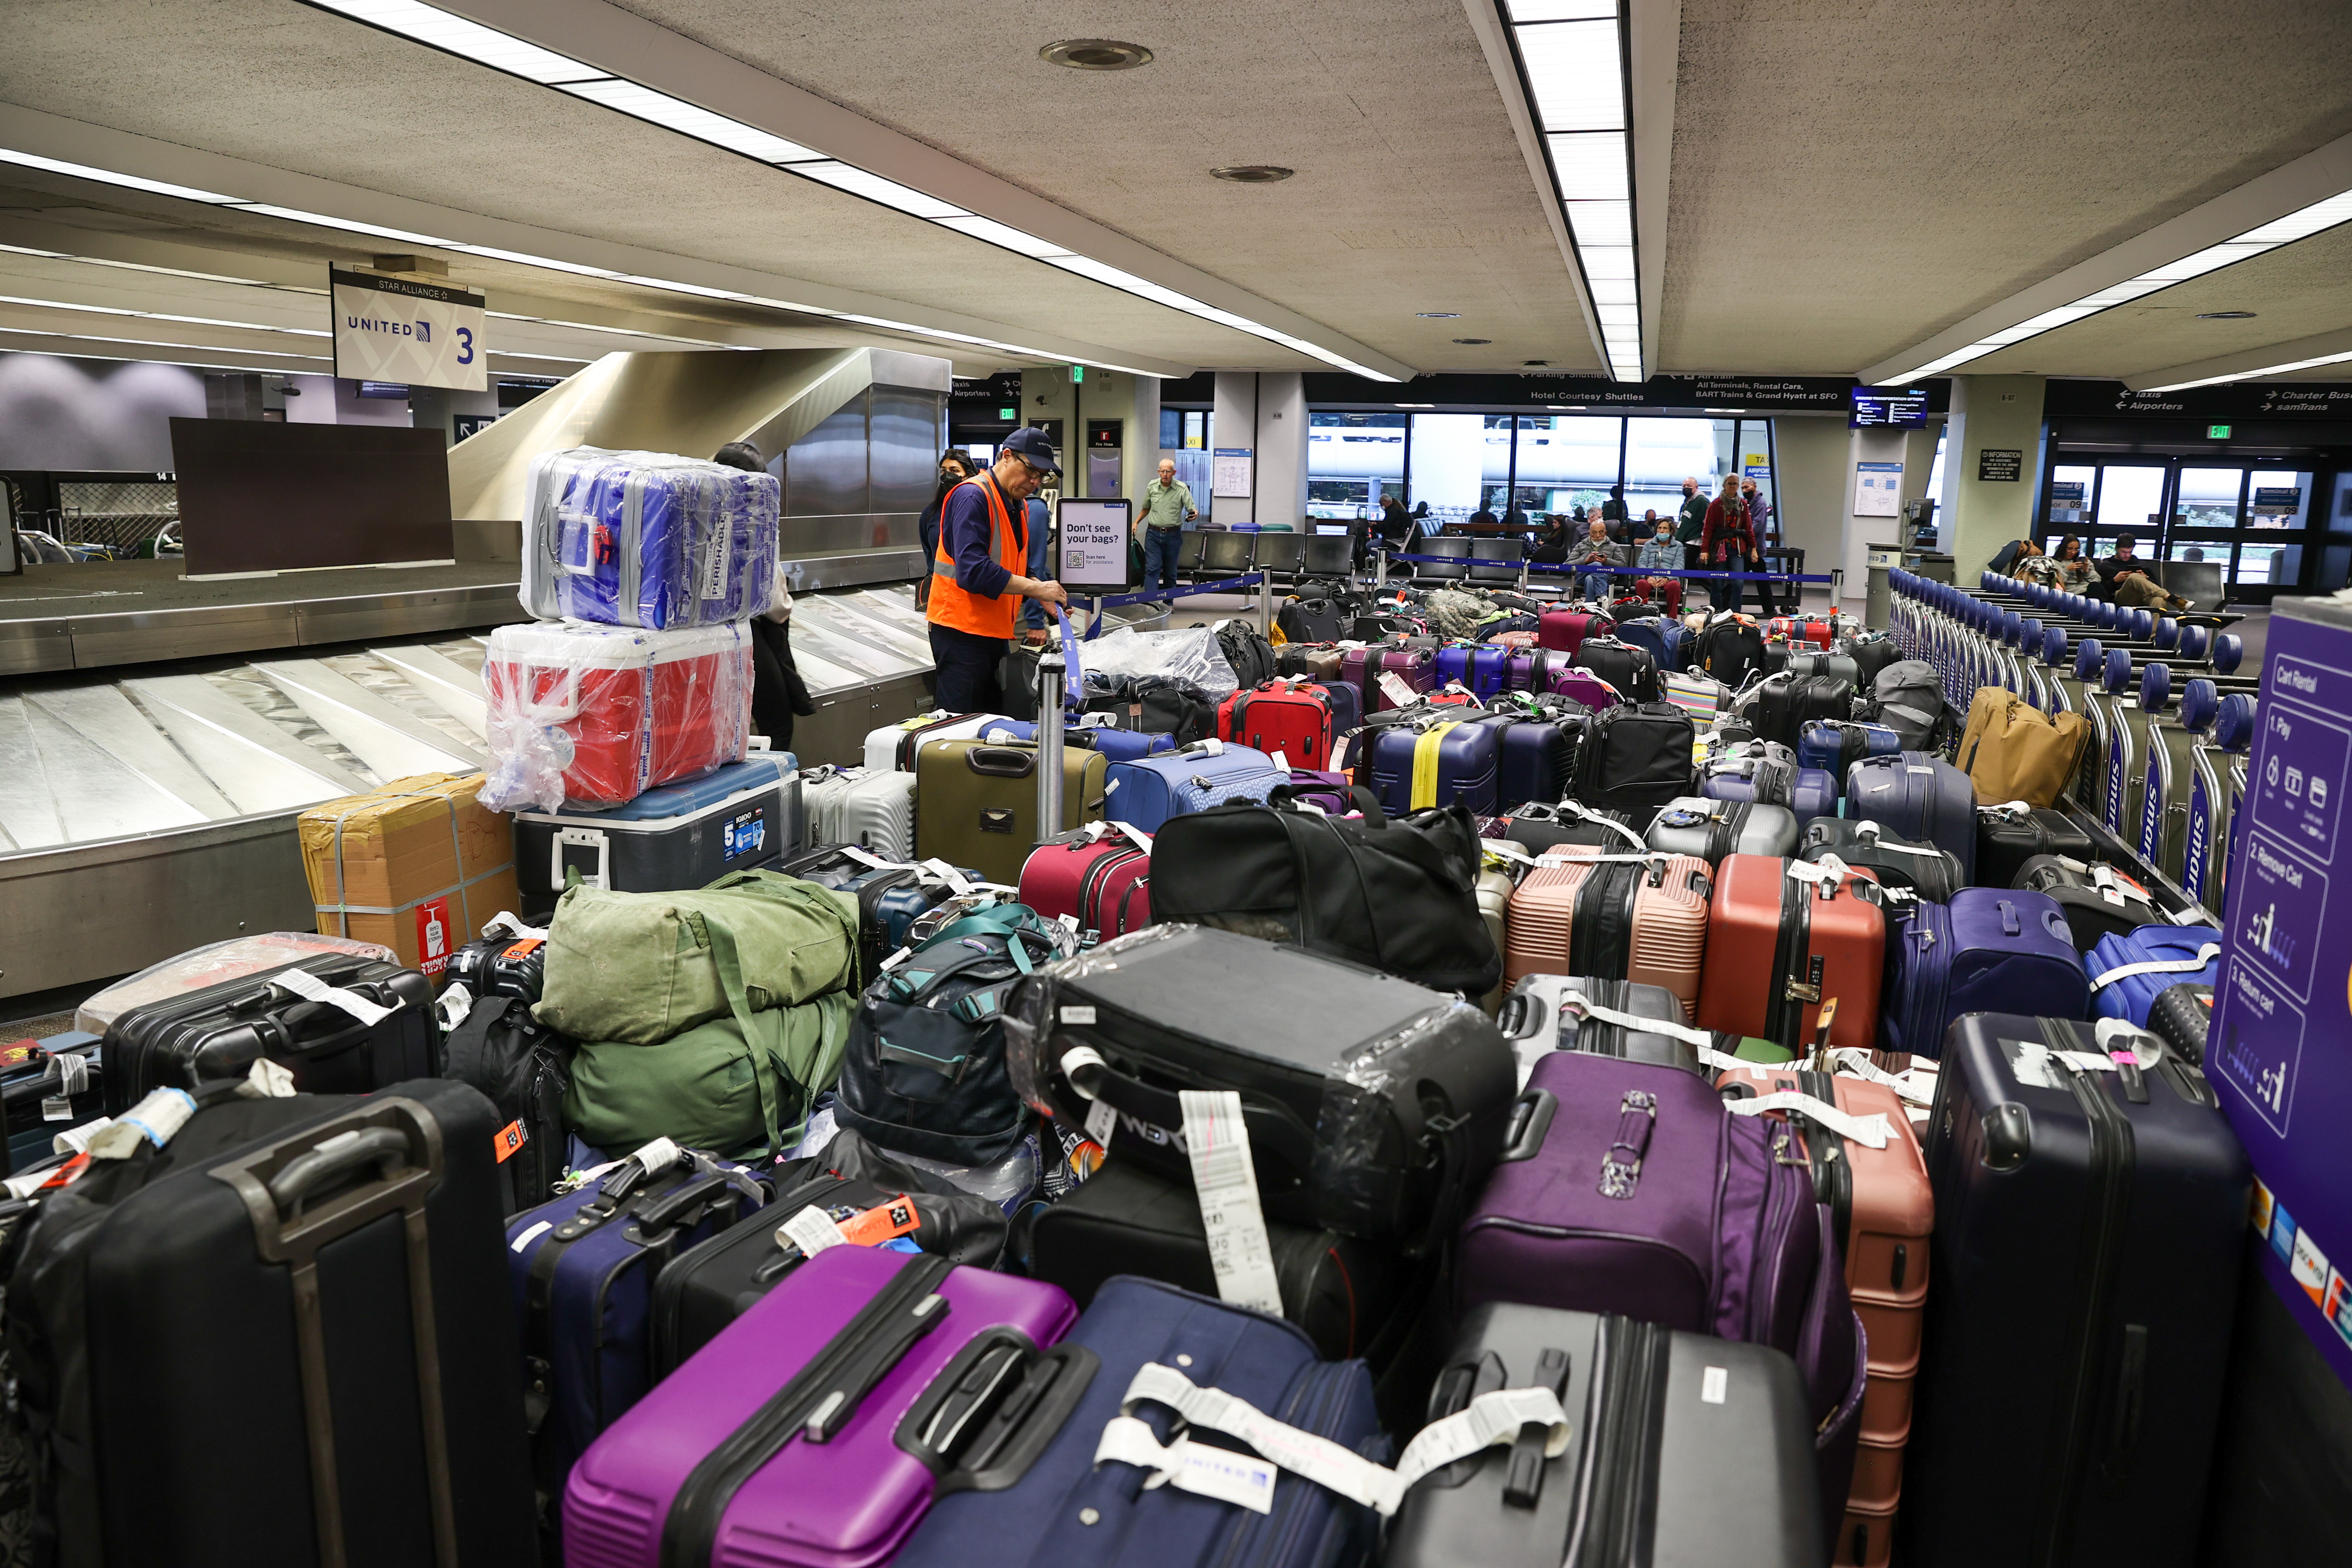 Christmas Travel Snarled With Wild Storm Still Enveloping Much of US